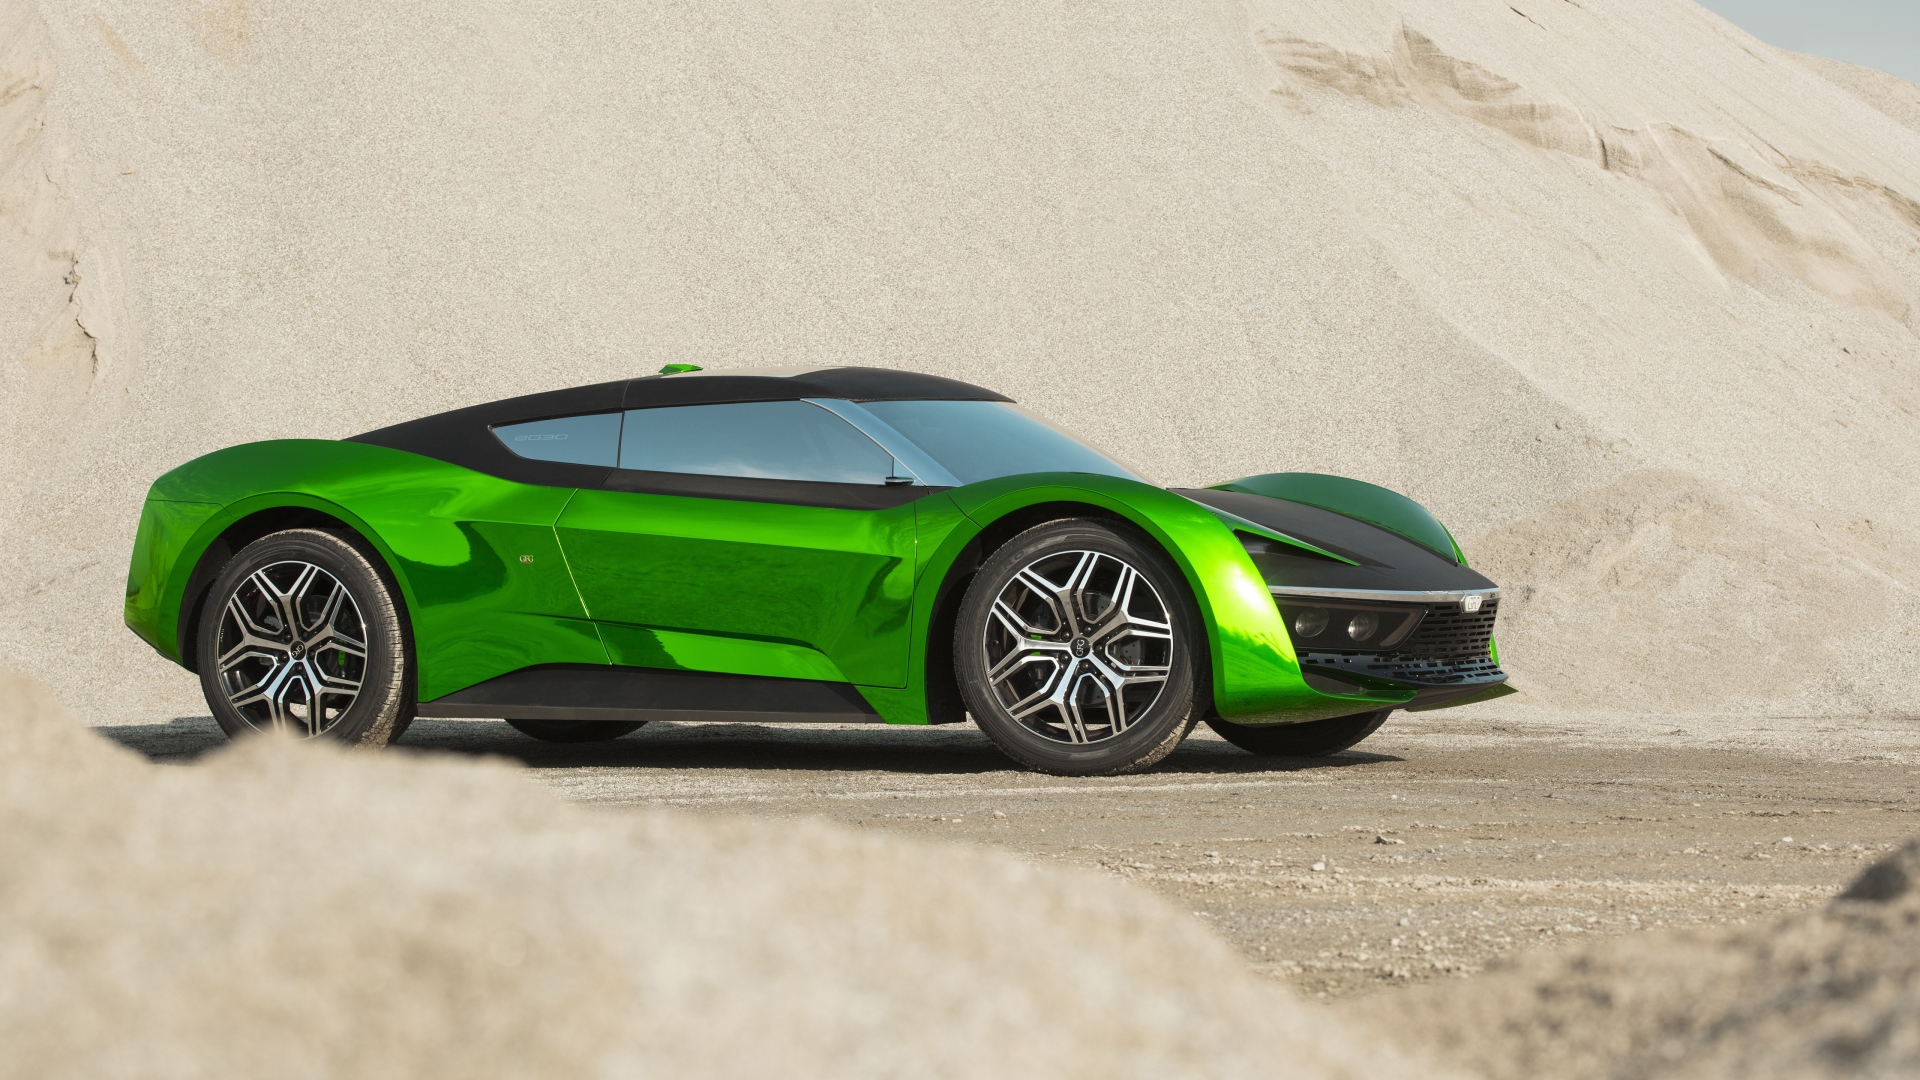 2020 green car GFG Vision stands in the sand